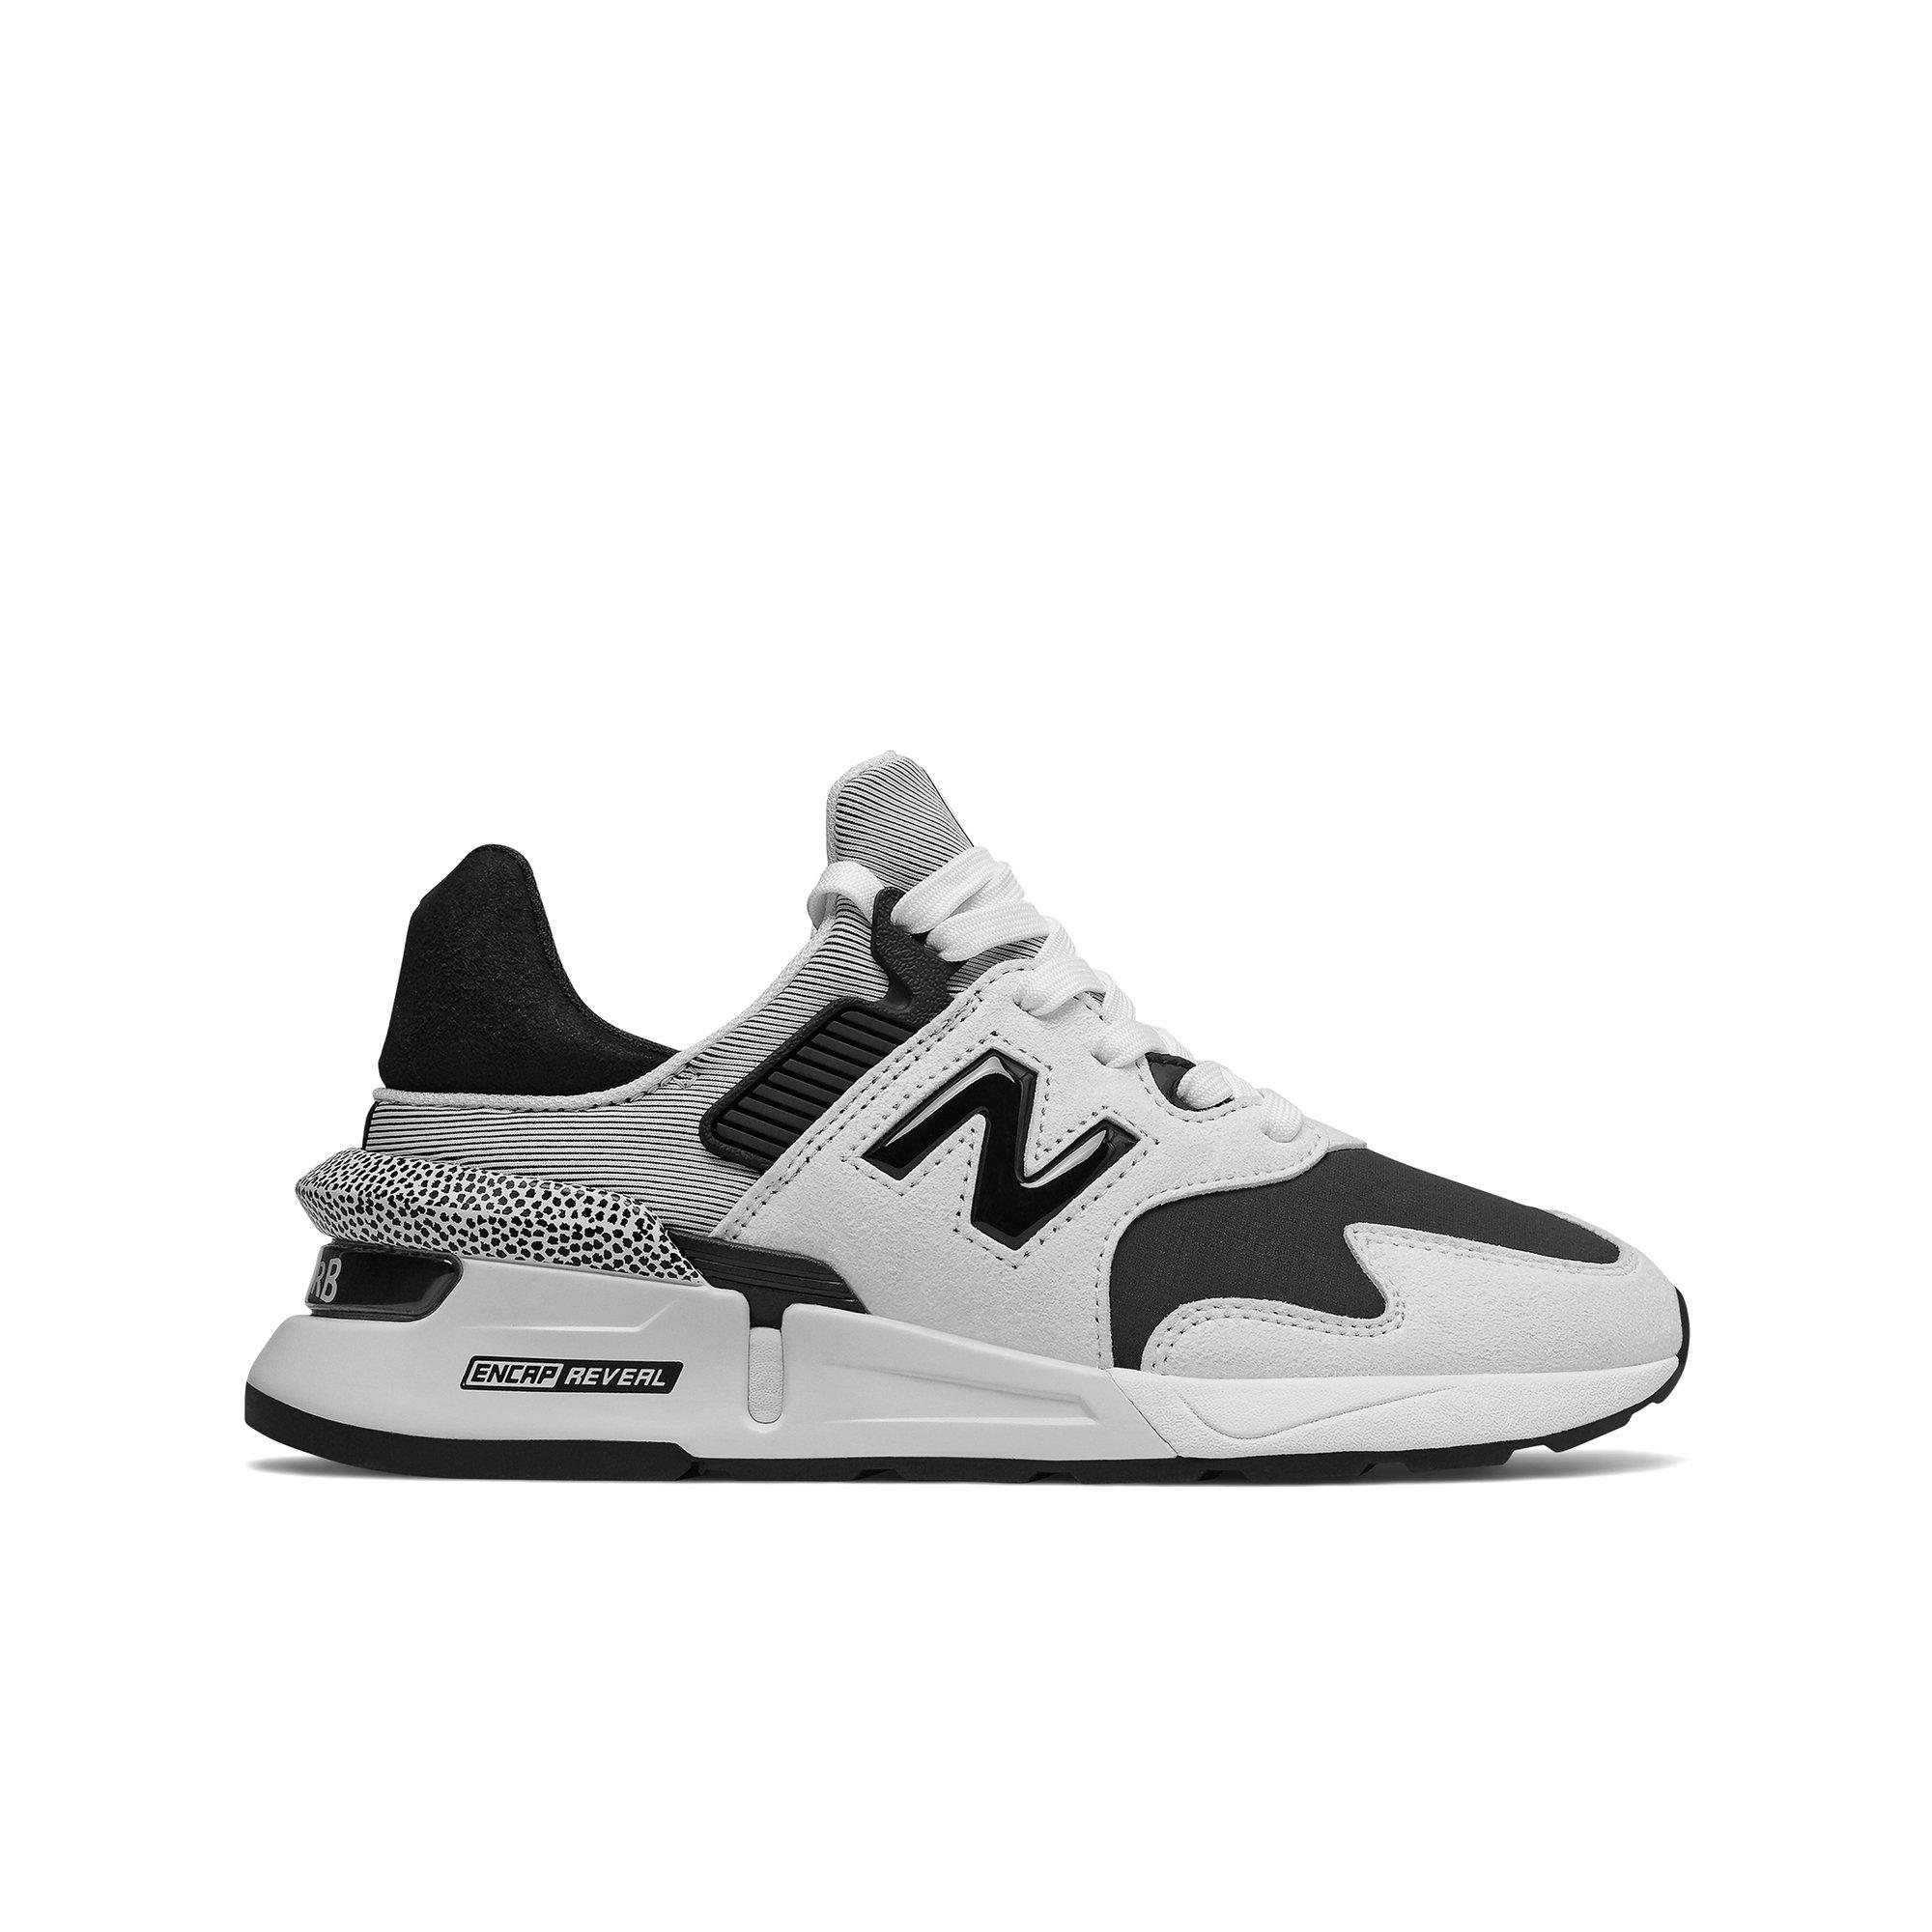 new balance 997s trainers in black & white